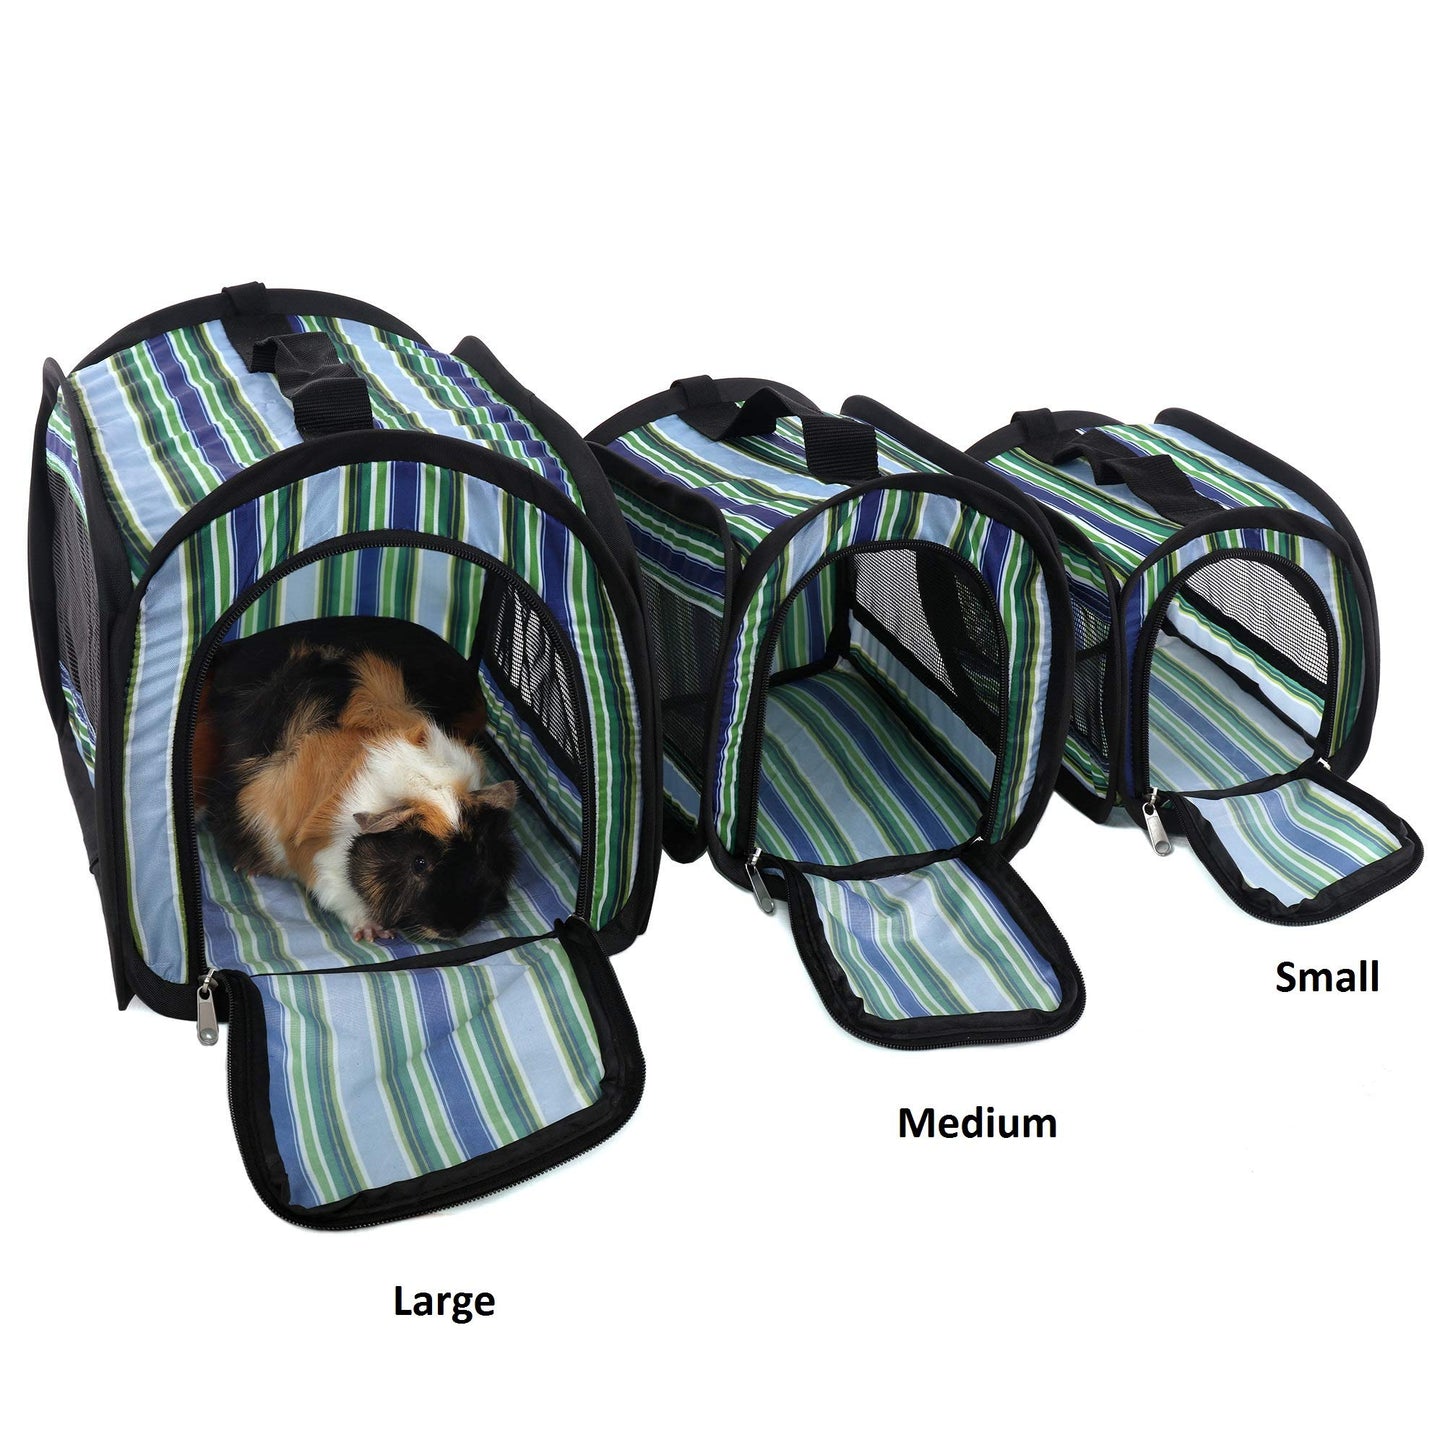 Ware Manufacturing Twist-N-Go Carrier for Small Pets, Hamsters, Ferrets, Rats...